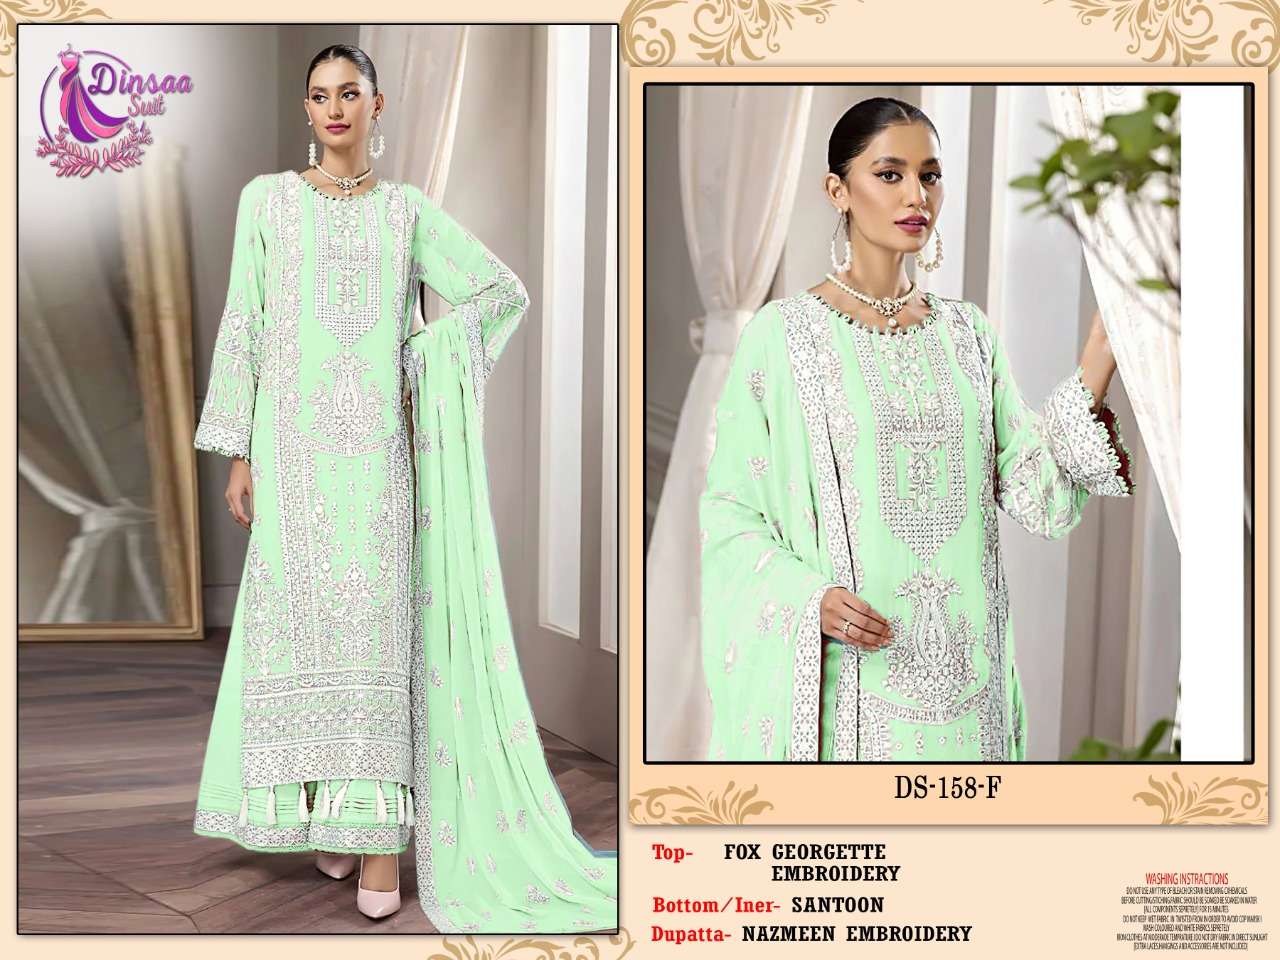 DINSAA SUITS PRESENTS 158 E TO H GEORGETTE EMBROIDERY WHOLESALE PAKISTANI SUITS